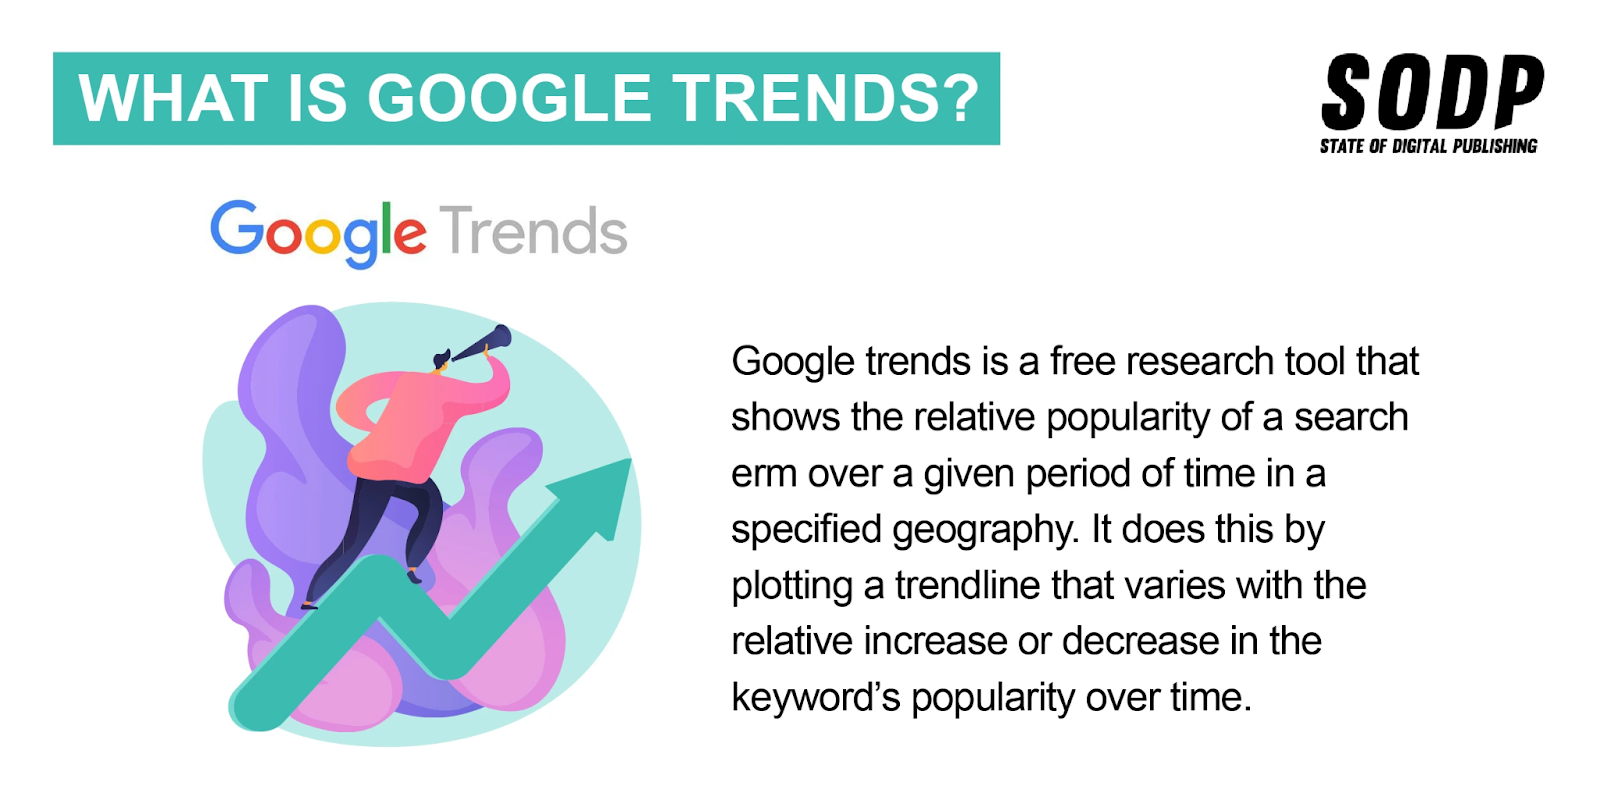 What Is Google Trends?